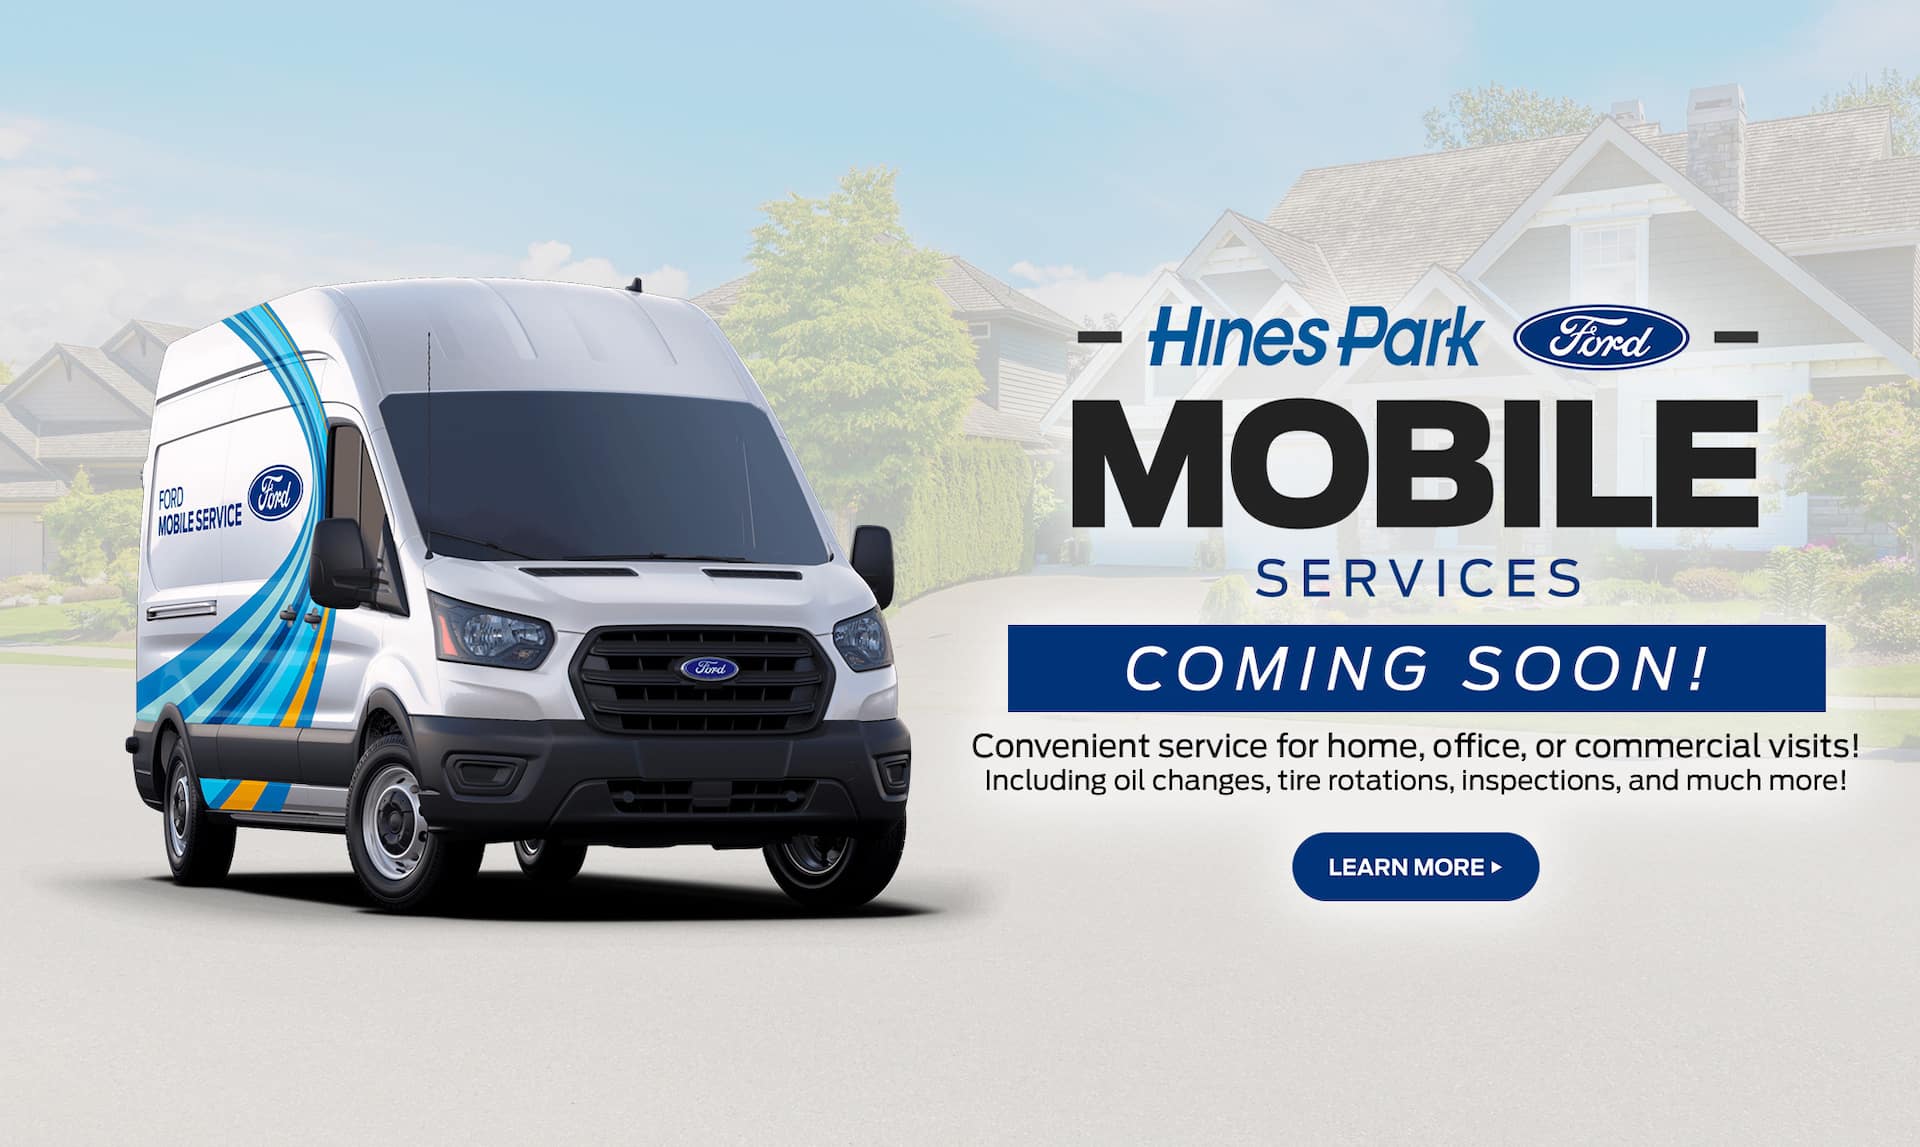 Mobile Service Coming Soon